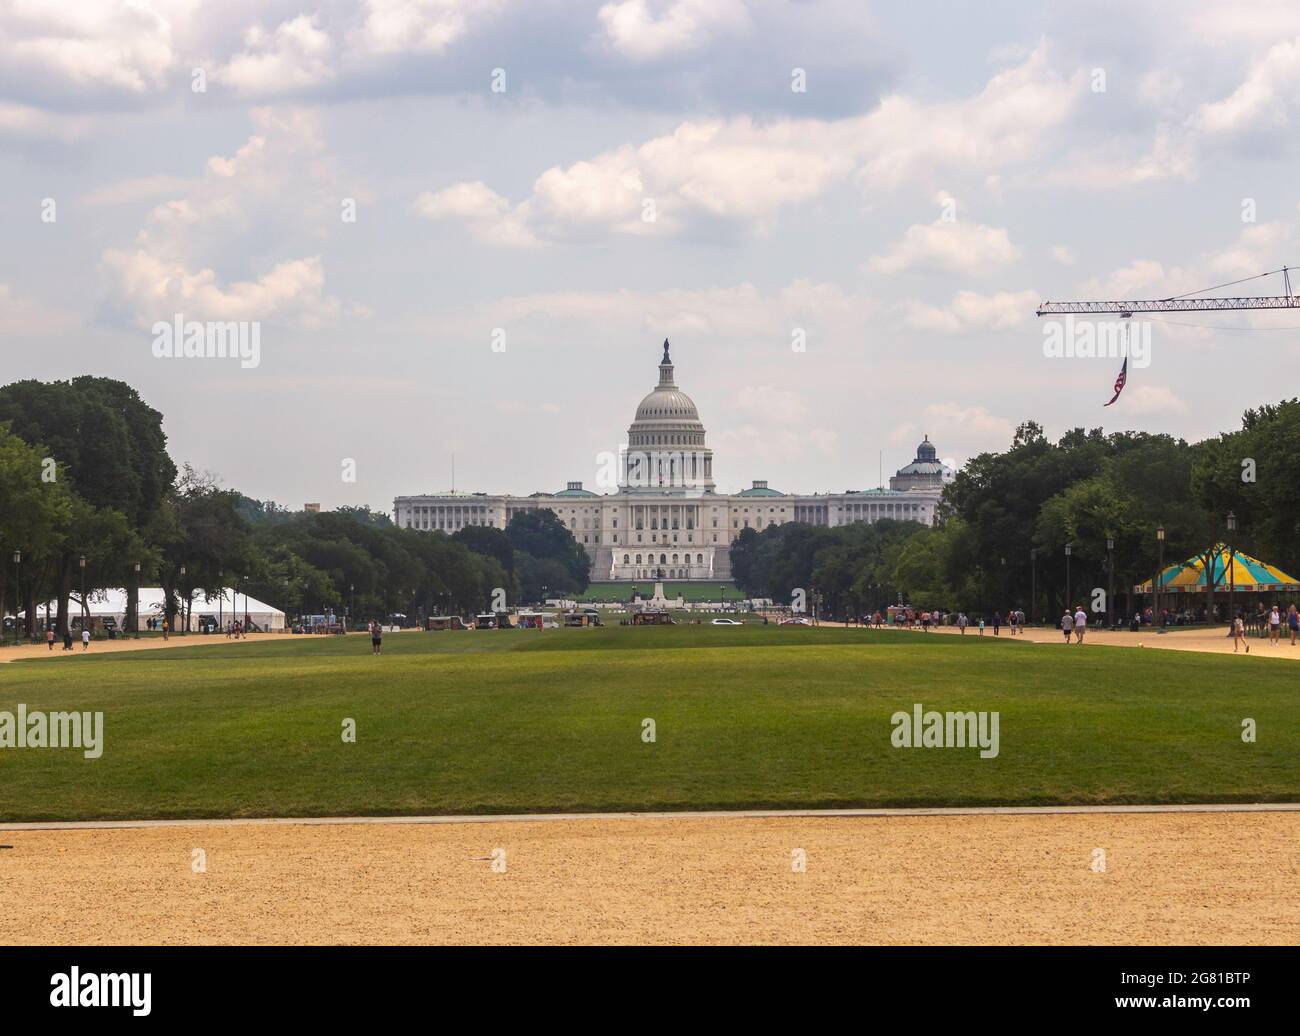 United States Capitol Building- Heavily Guarded After the January 6th Attacks Stock Photo